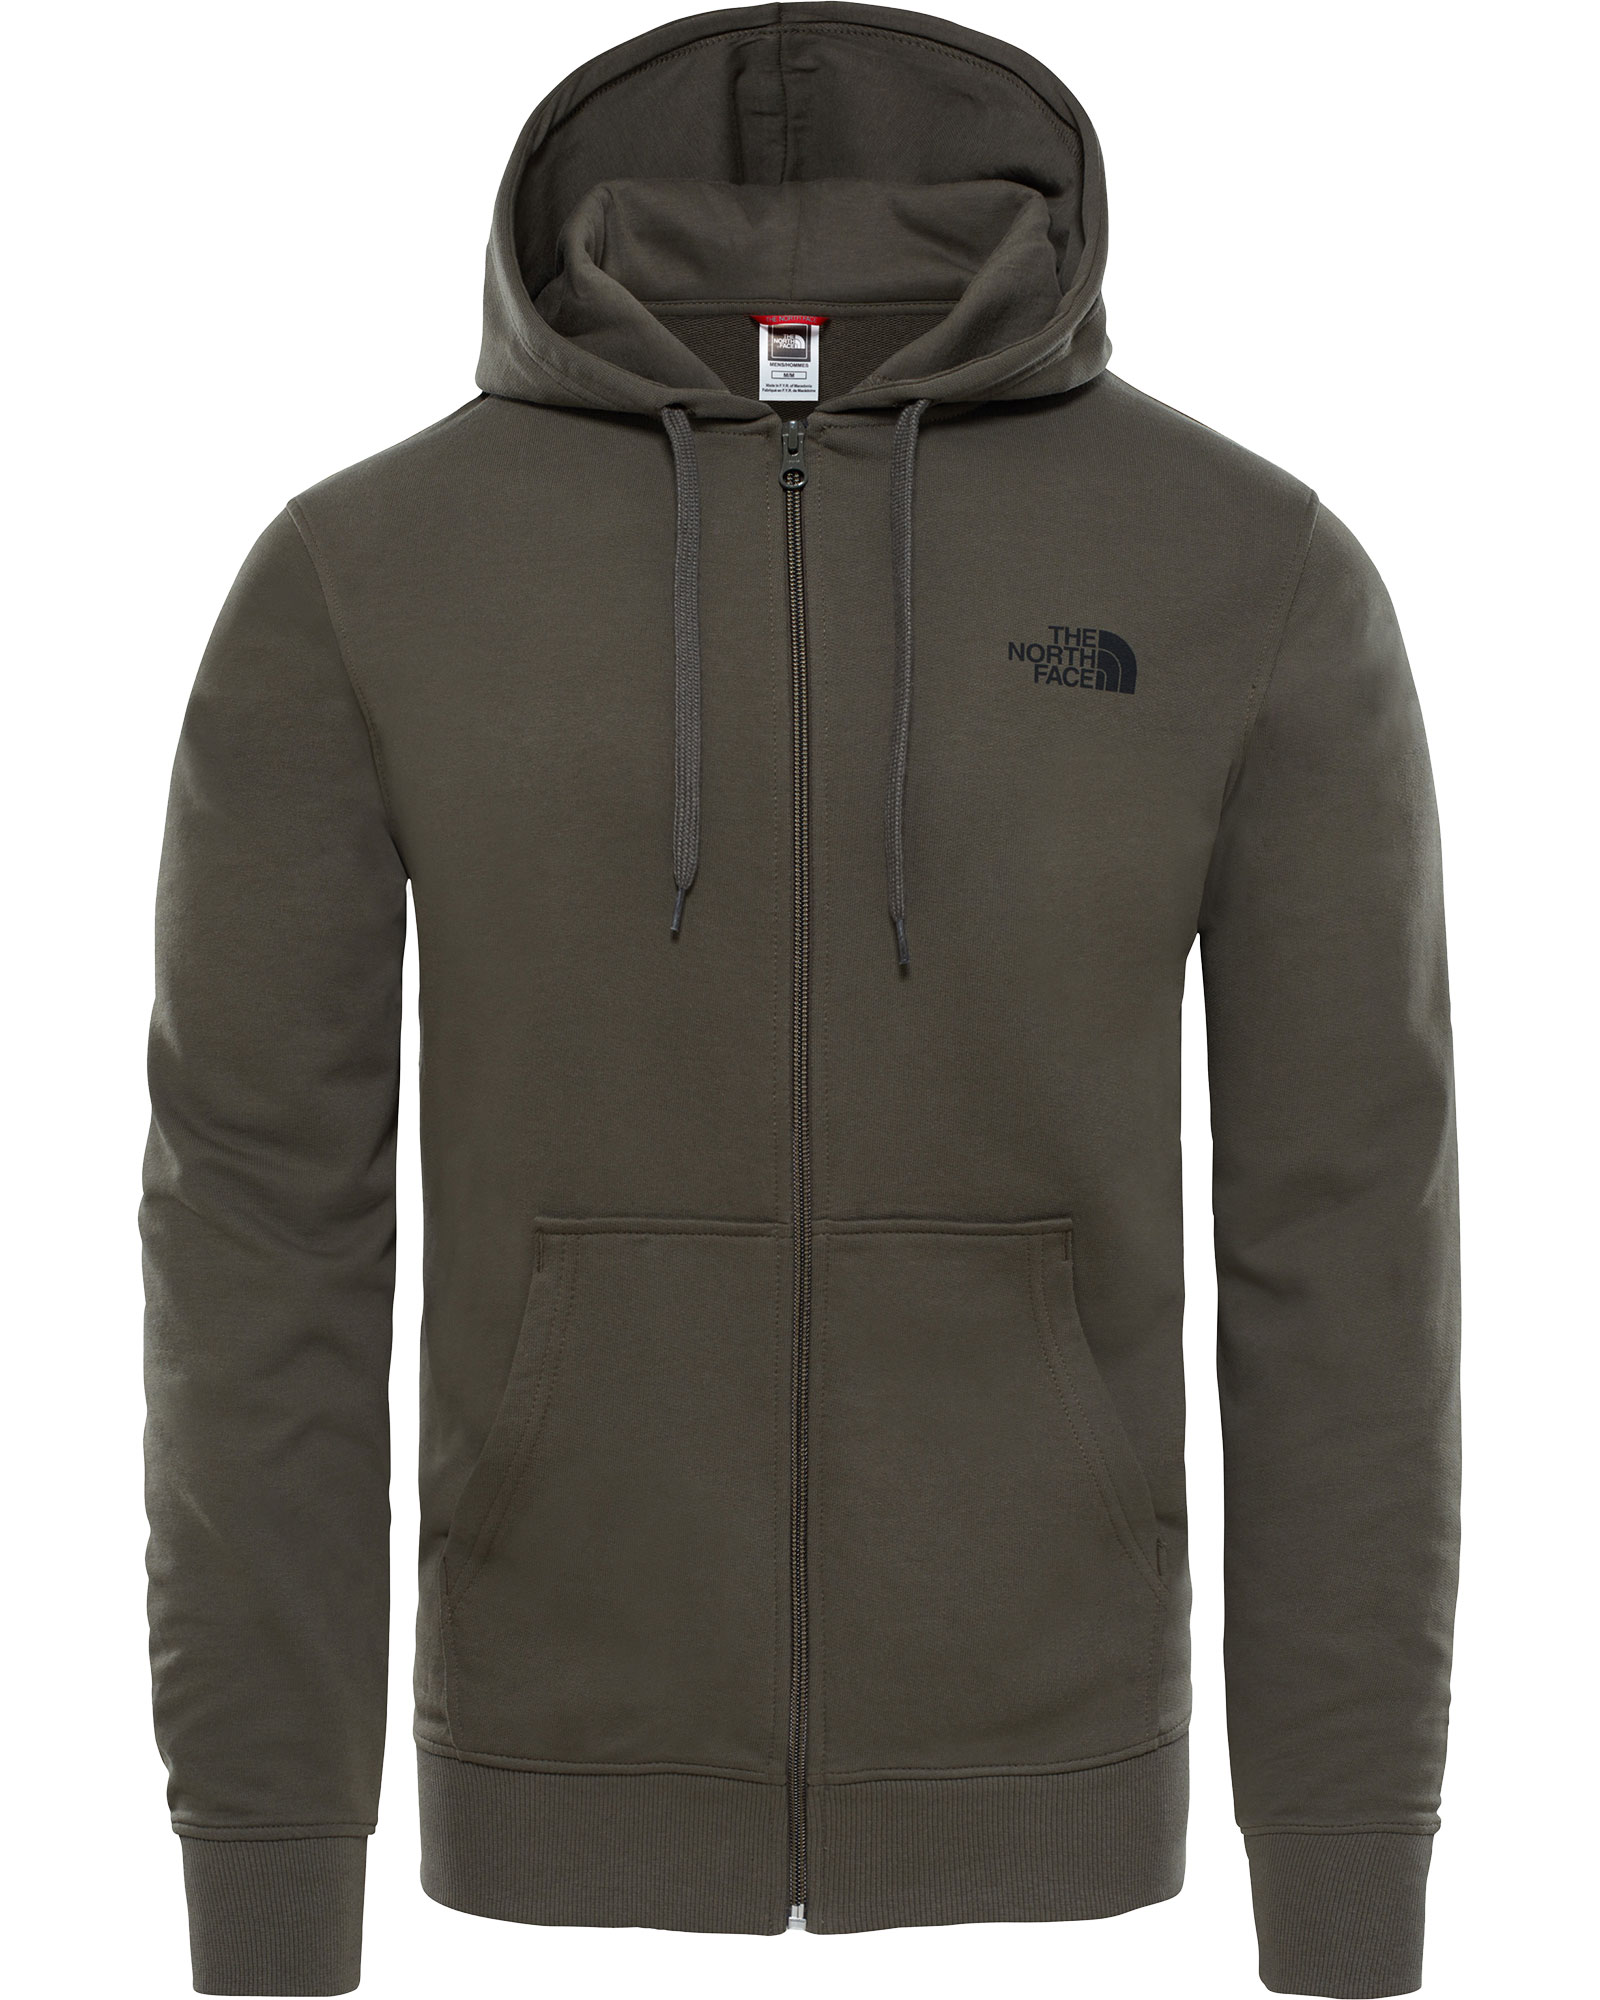 The North Face Open Gate Men’s Full Zip Hoodie - New Taupe Green XS